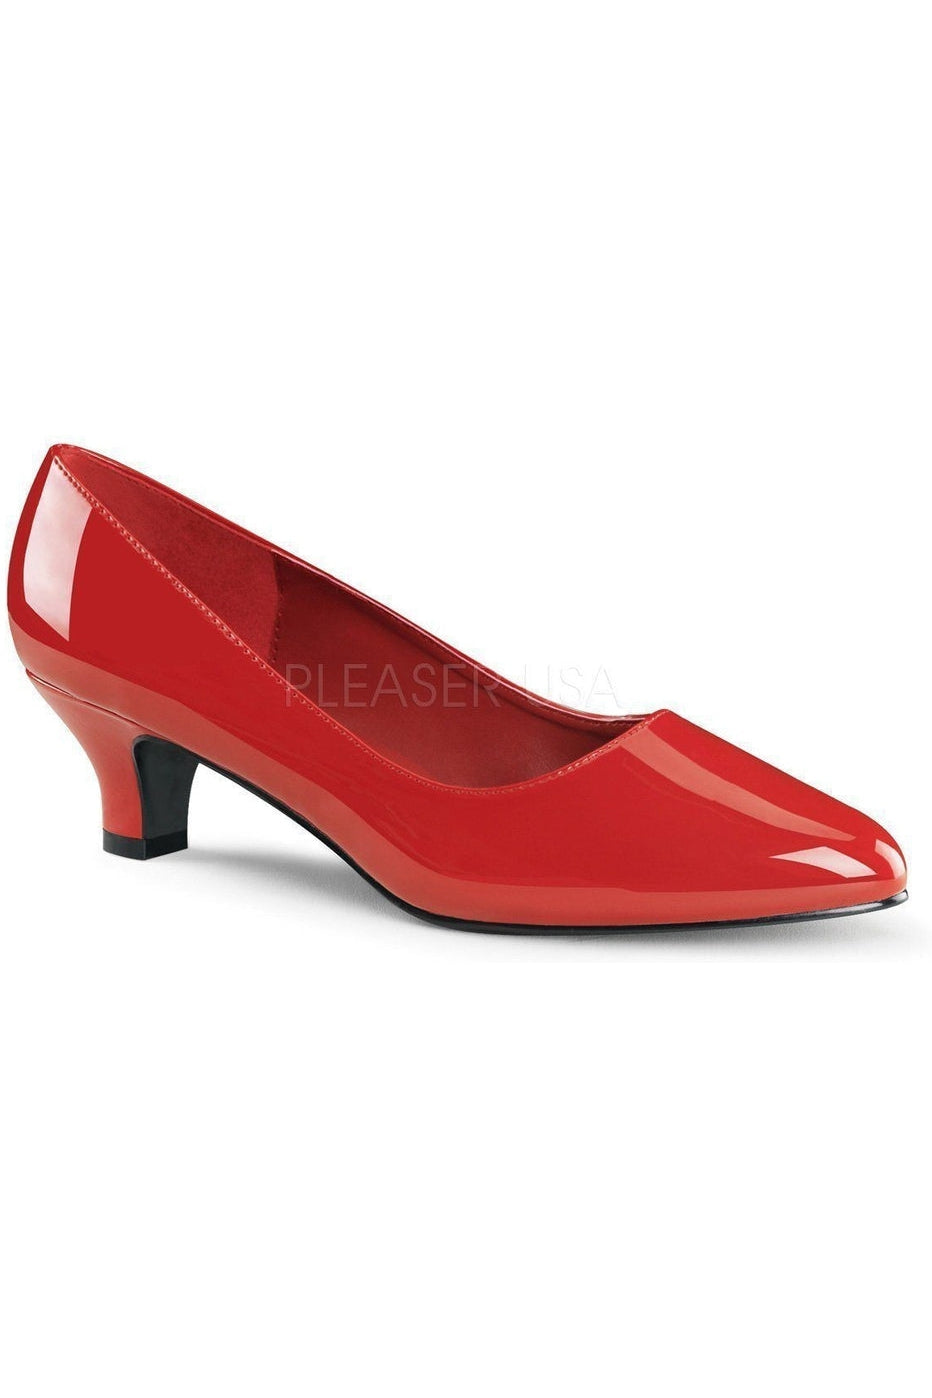 FAB-420 Pump | Red Patent-Pleaser Pink Label-Red-Pumps-SEXYSHOES.COM